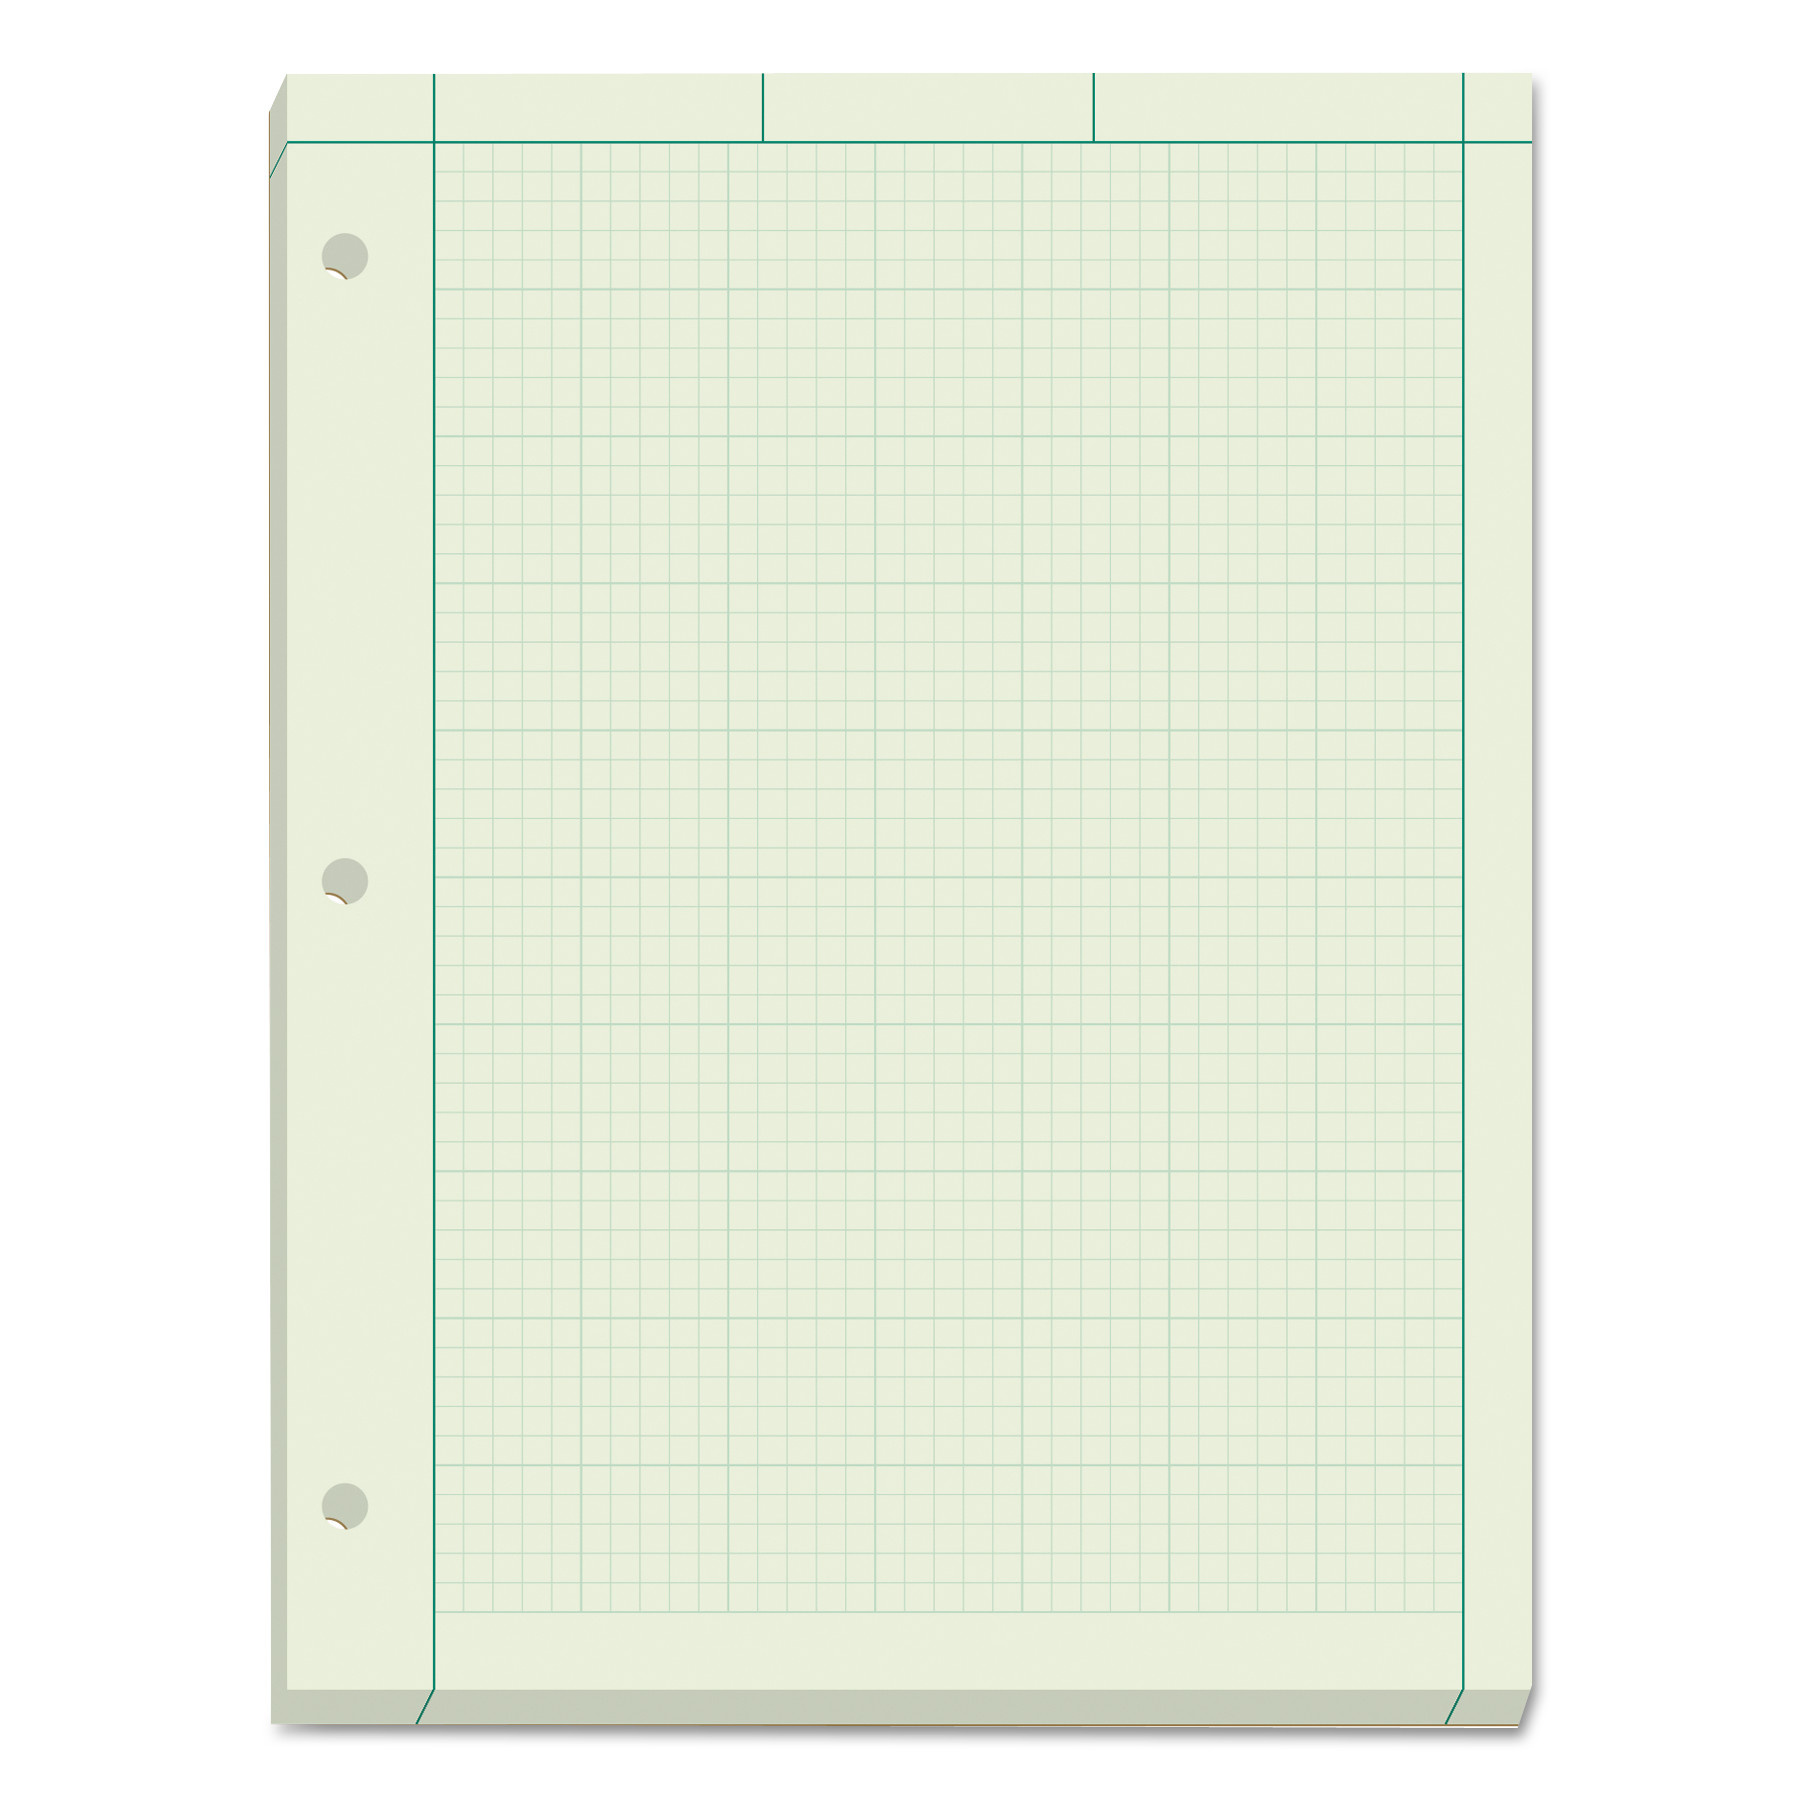  TOPS 35502 Engineering Computation Pads, 5 sq/in Quadrille Rule, 8.5 x 11, Green Tint, 200 Sheets (TOP35502) 